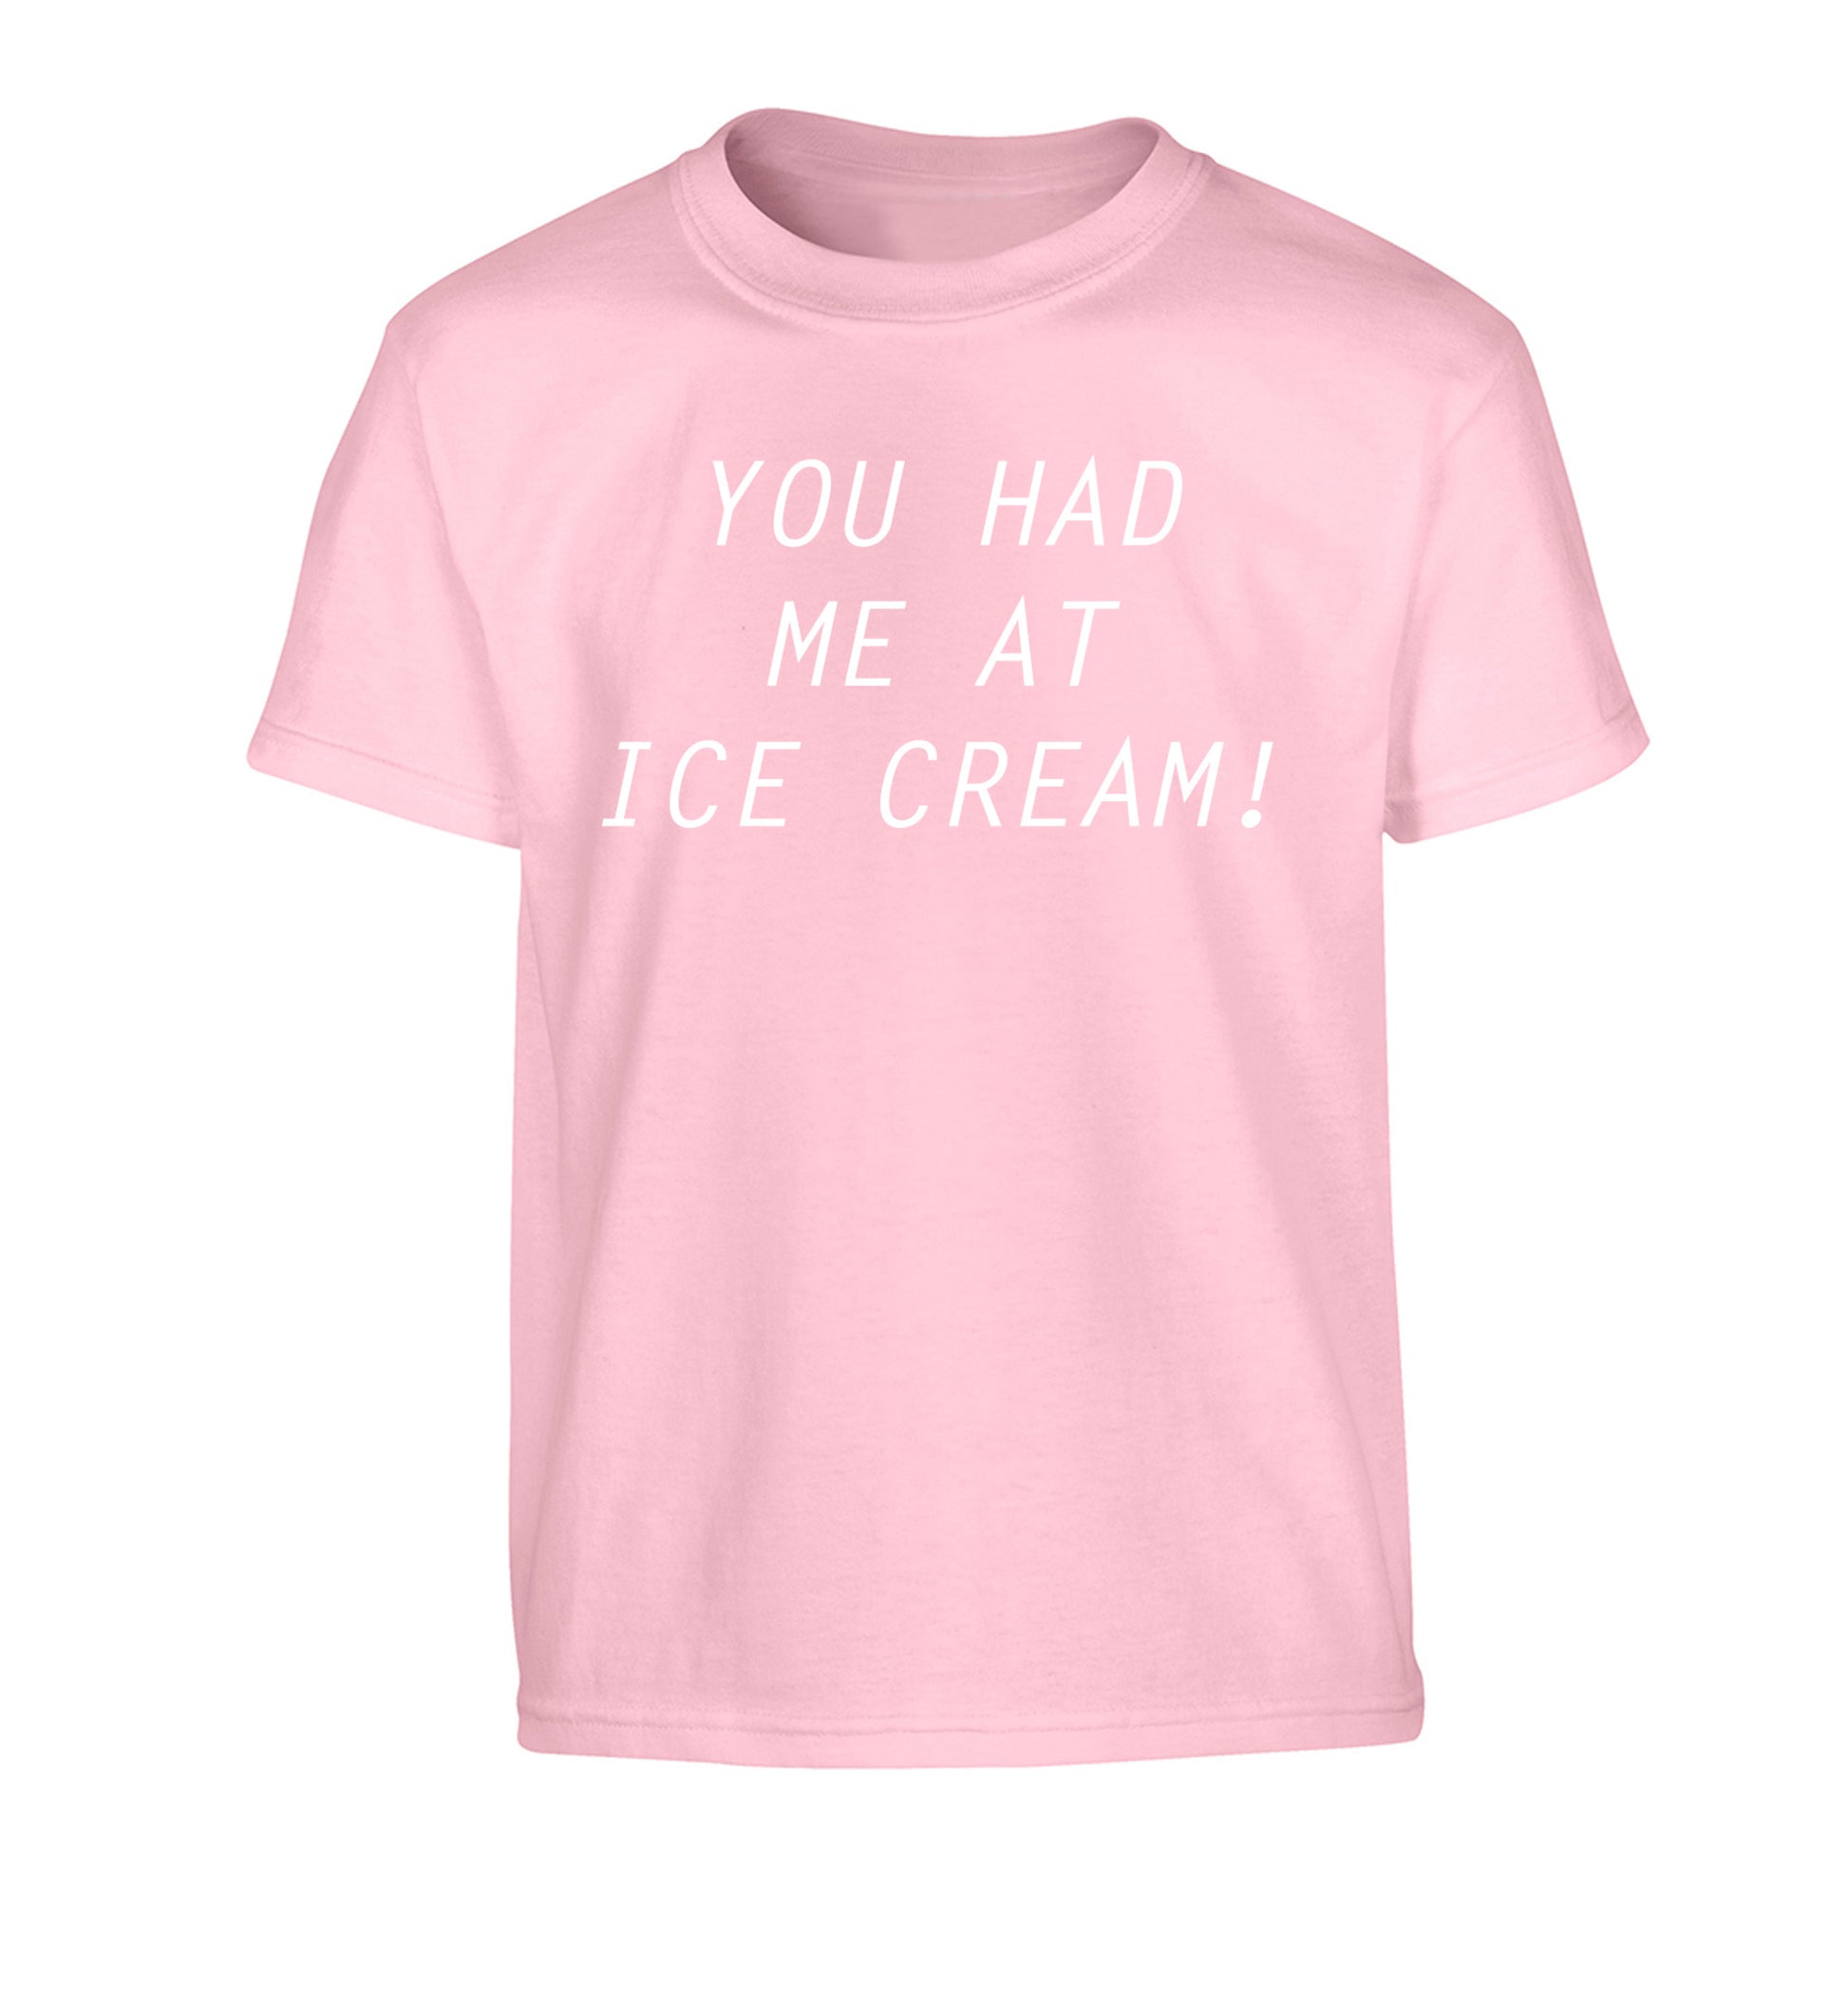 You had me at ice cream Children's light pink Tshirt 12-14 Years